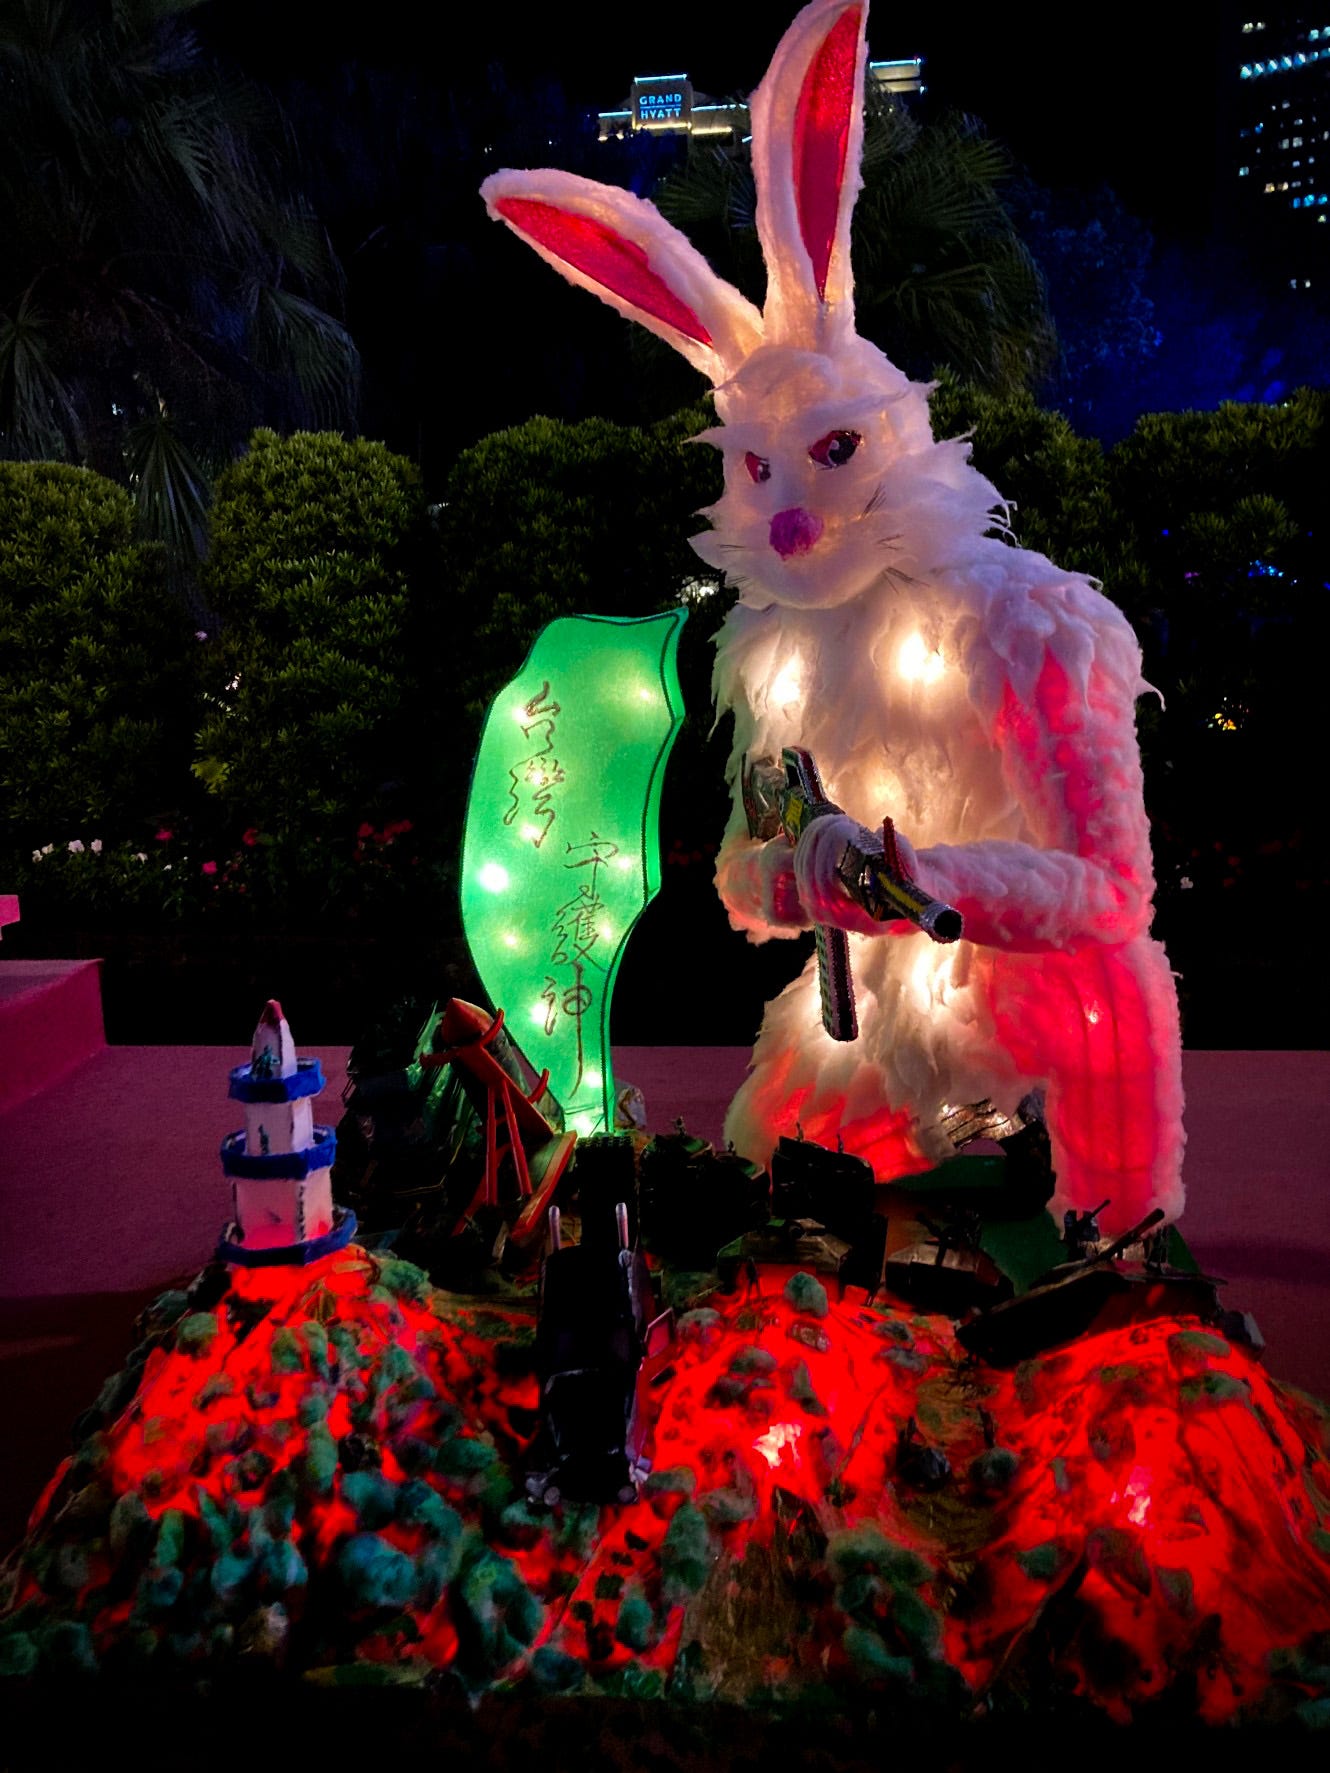 Images of a rabbit armed with a machine gun created by incarcerated people went viral at the 2023 Taiwan Lantern Festival